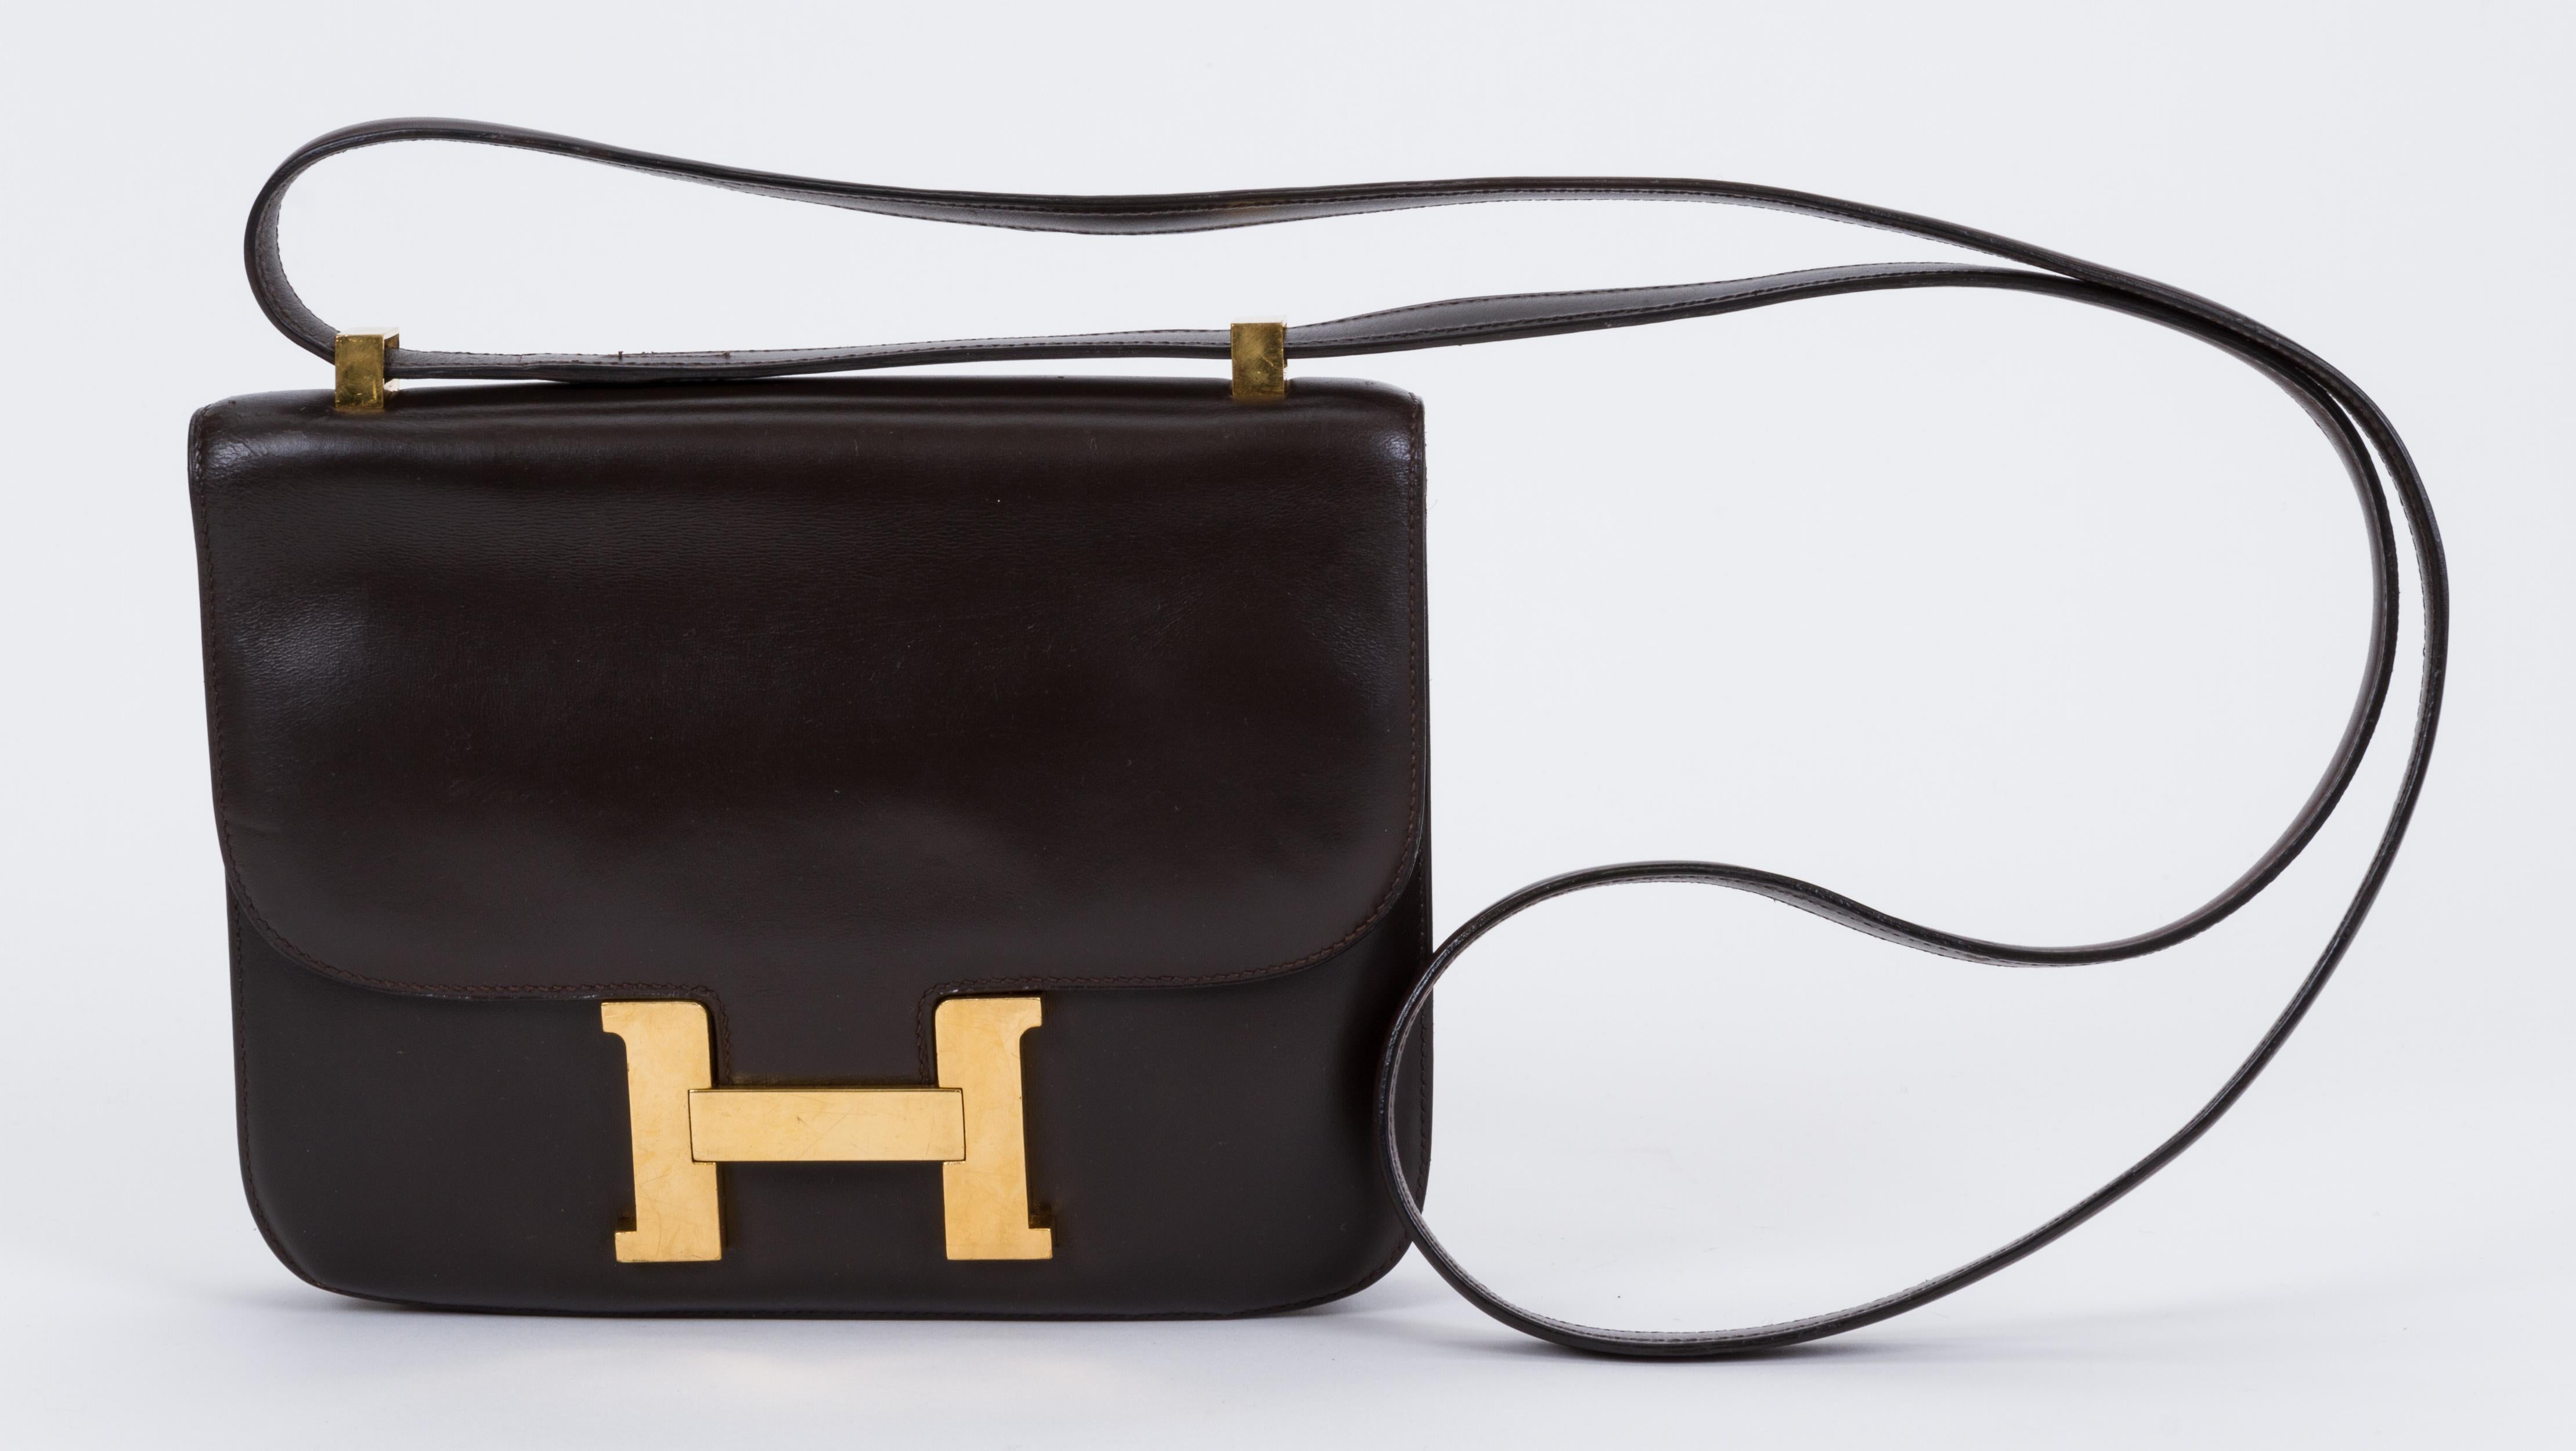 Hermès chocolate brown box calf leather constance bag. Dated B for 1972. Shoulder drop, 12.5